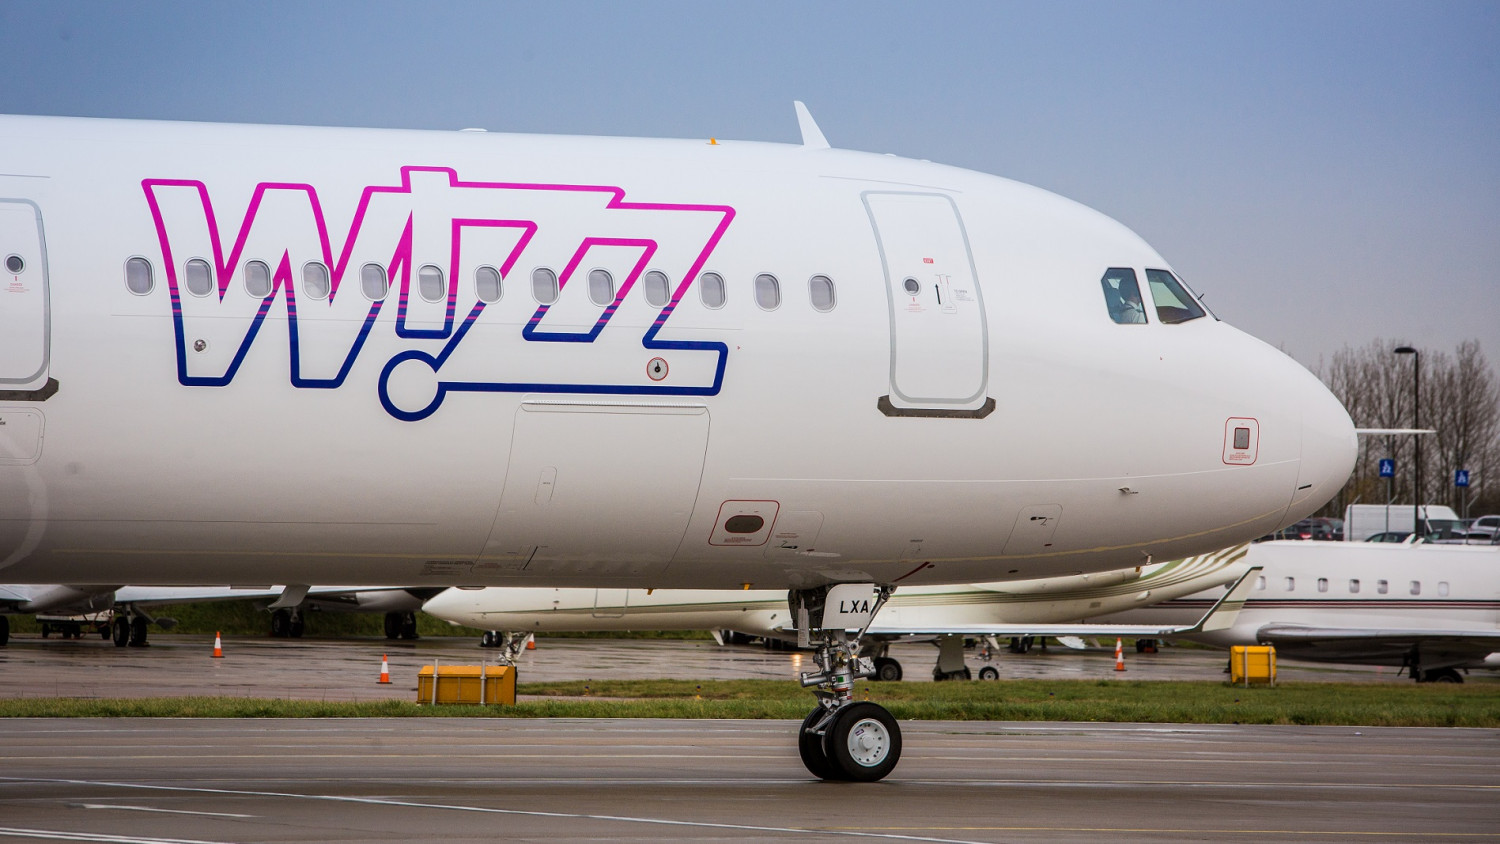 Wizz Air announced its largest expansion of its route to date